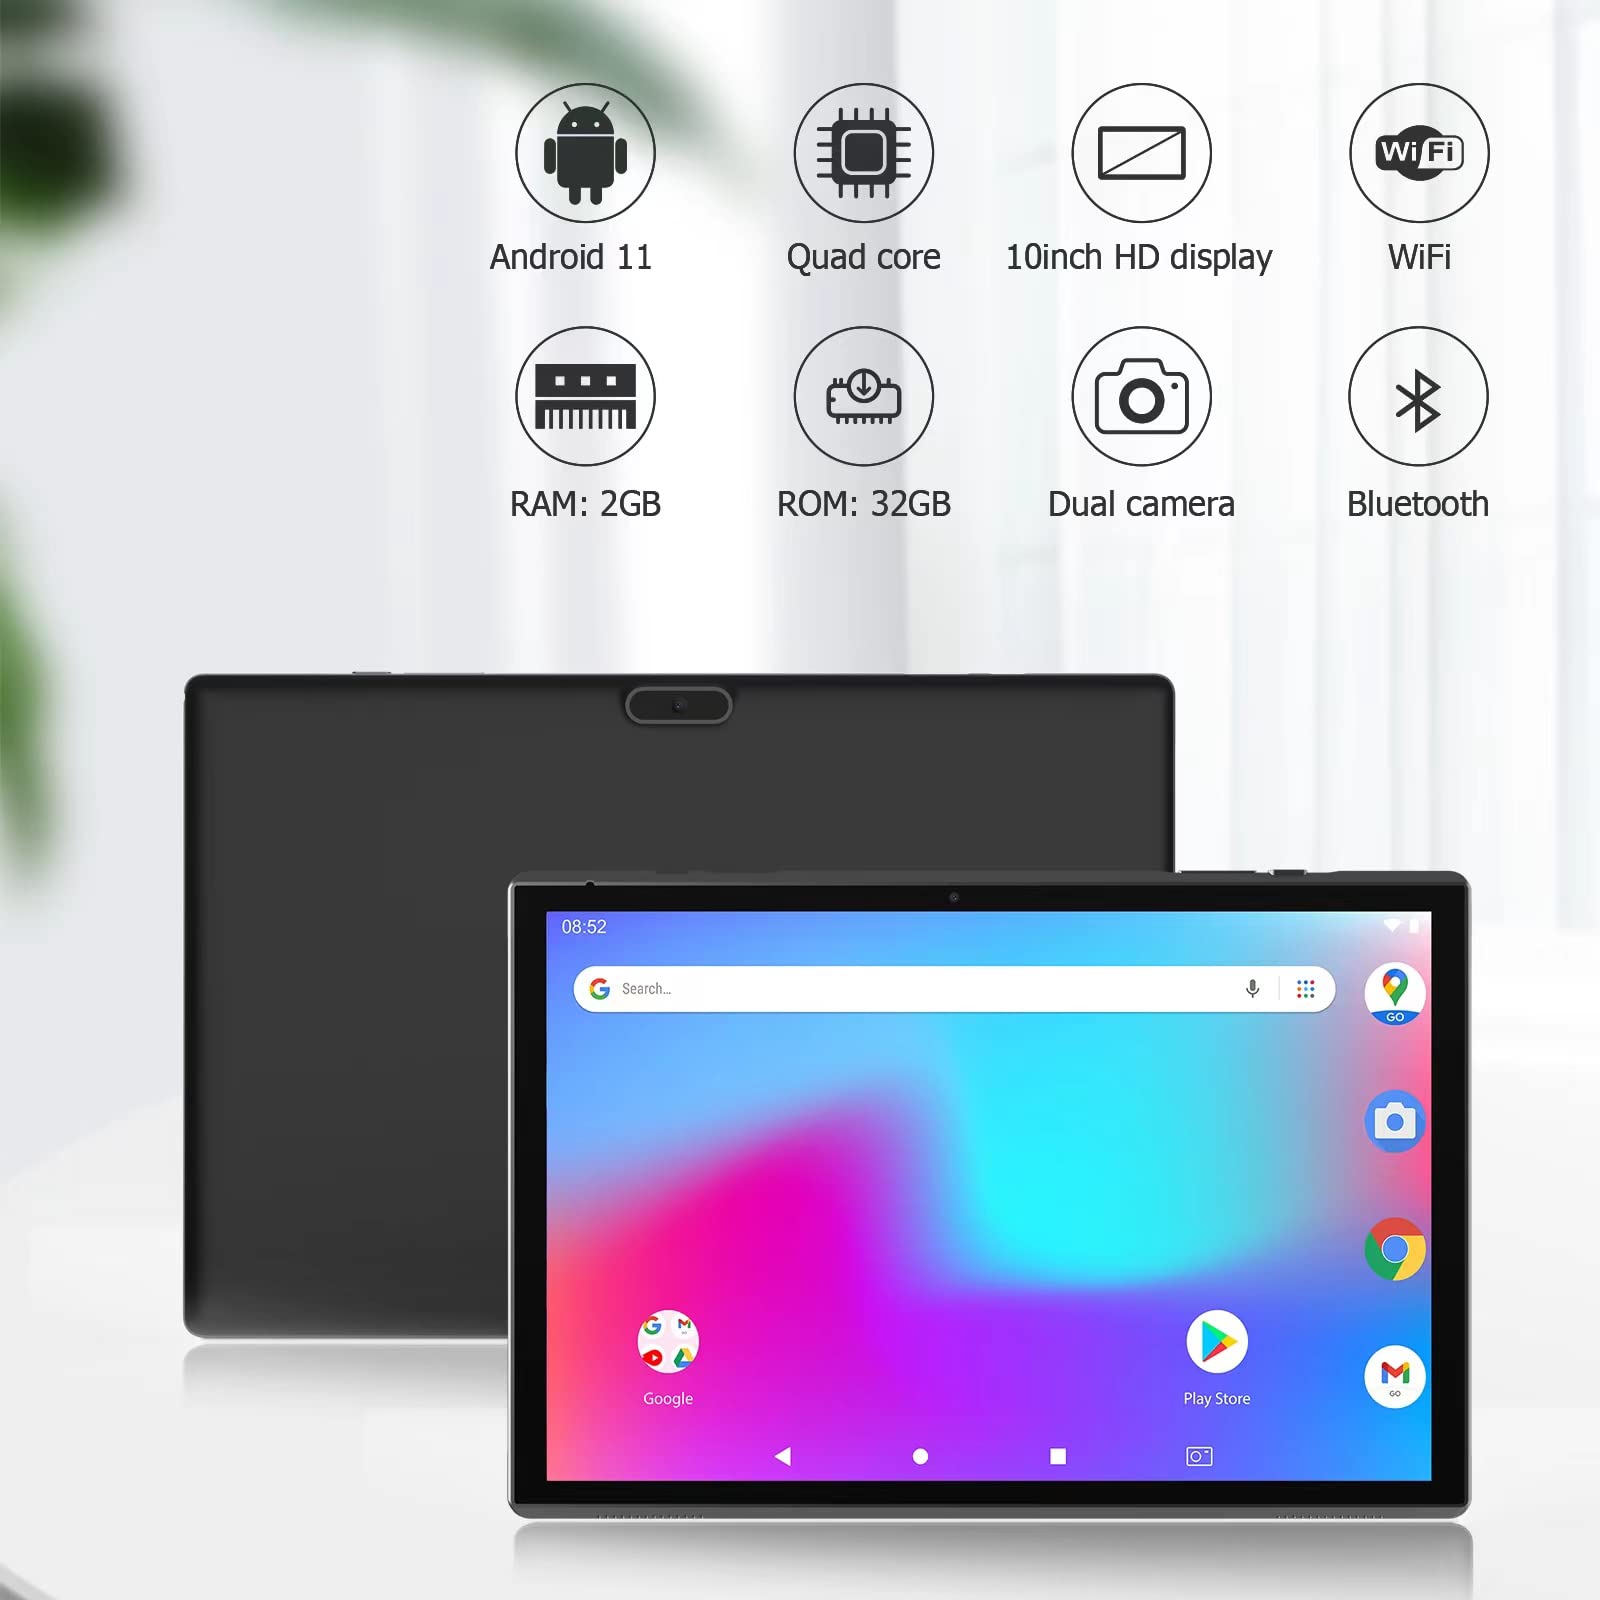 10 Inch Tablet, Google Android 11 Tablet, Quad-Core Processor Tableta Computer with 32GB ROM 2GB RAM 8MP Camera WiFi BT 10.1 in HD Display, 6000mAh Long Battery Life Tablet.